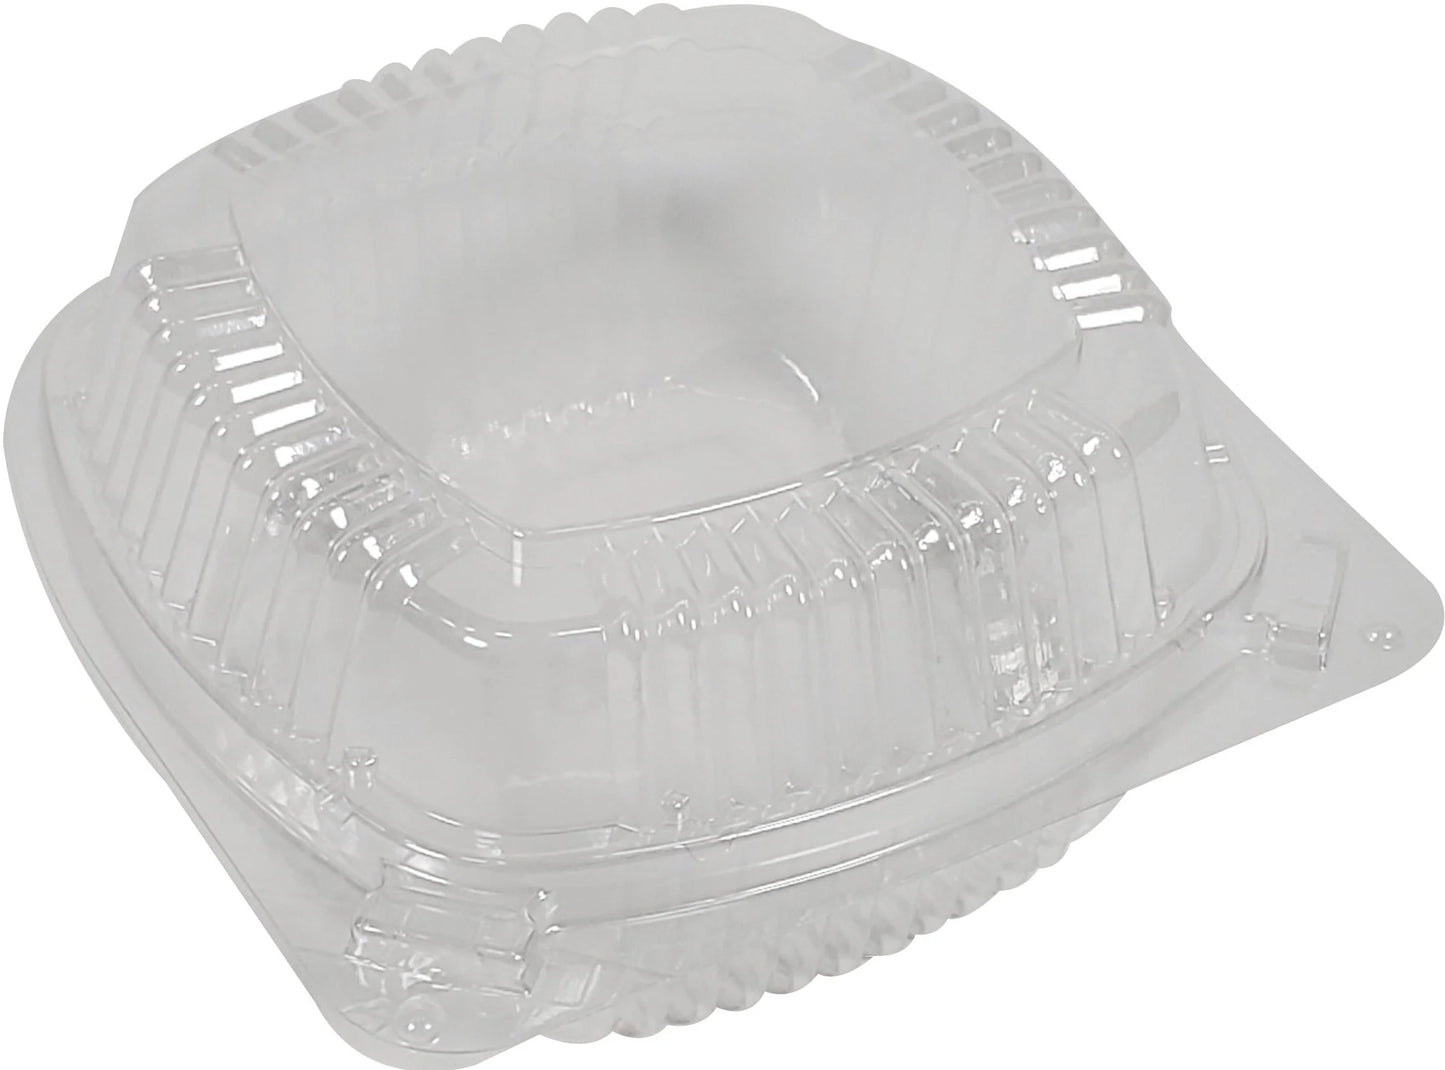 YC18-1050 5" CLEAR CLAMSHELL CONTAINER PACTIV (375)